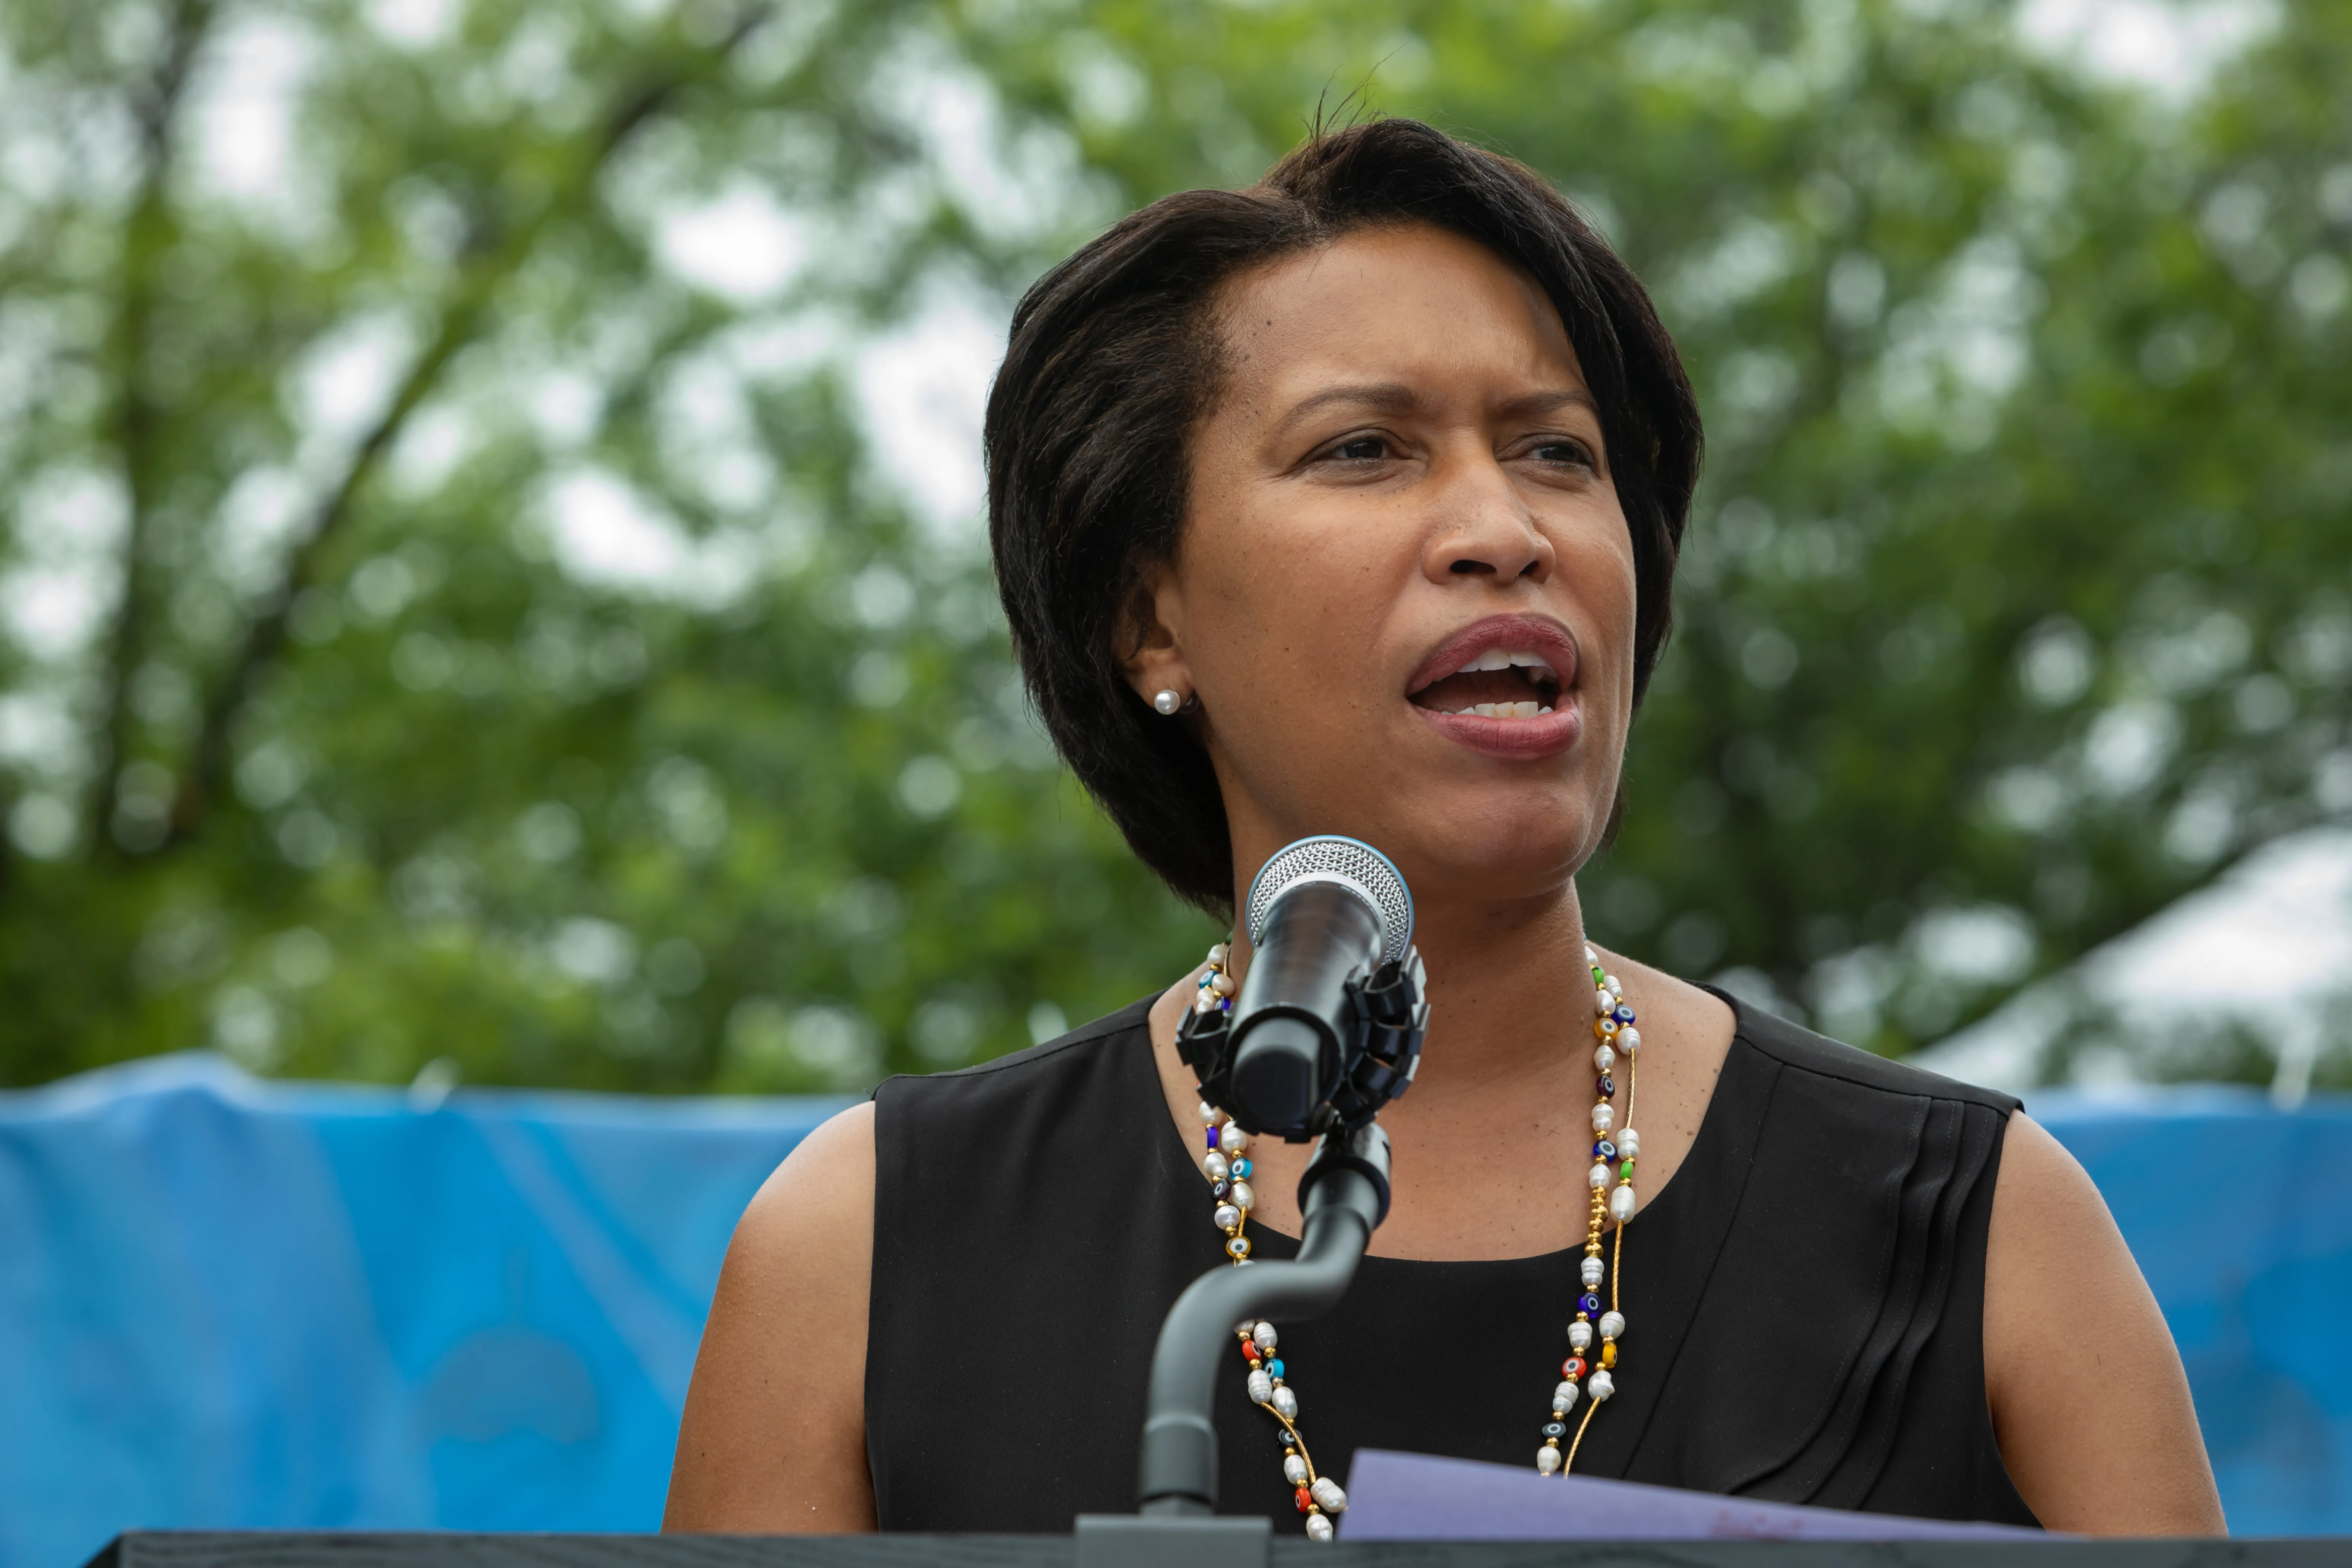 Mayor Muriel Bowser during a speech at the Pride Parade on June 12, 2021.?w=200&h=150